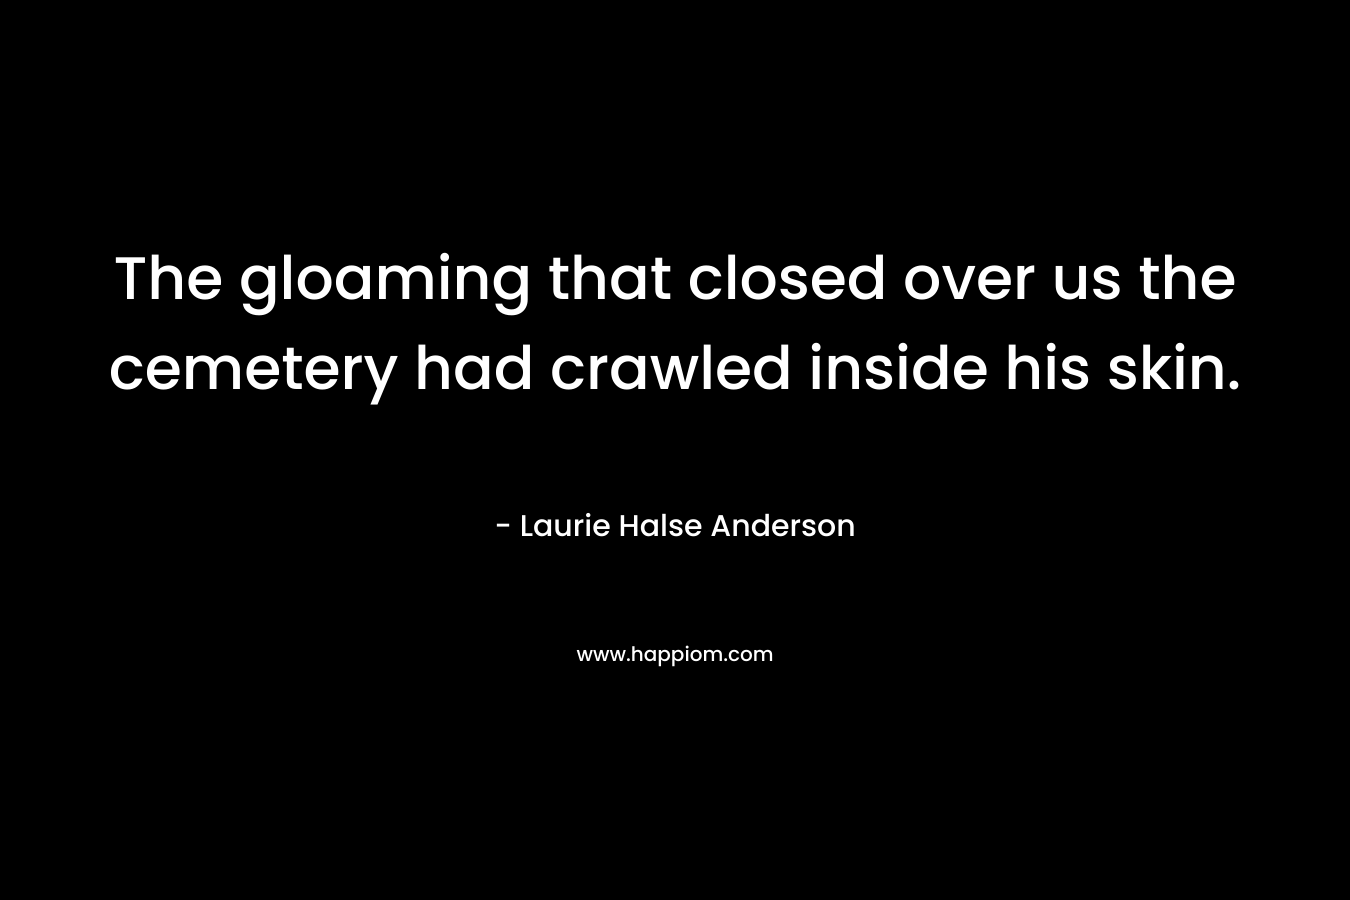 The gloaming that closed over us the cemetery had crawled inside his skin. – Laurie Halse Anderson